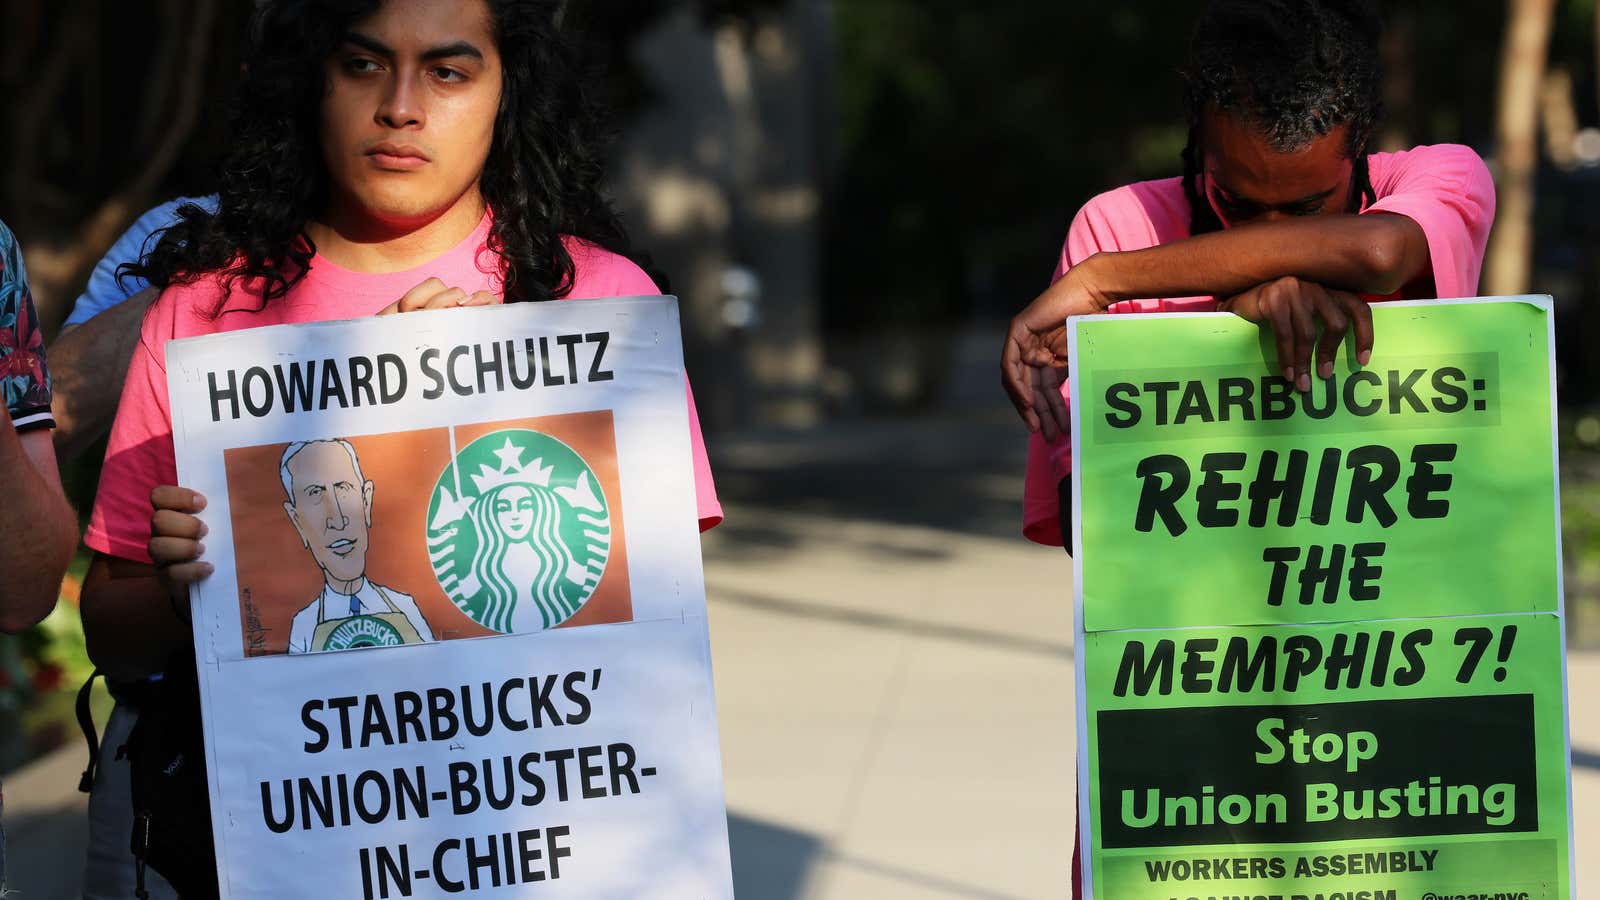 Howard Schultz's third round as Starbucks CEO soured his legacy